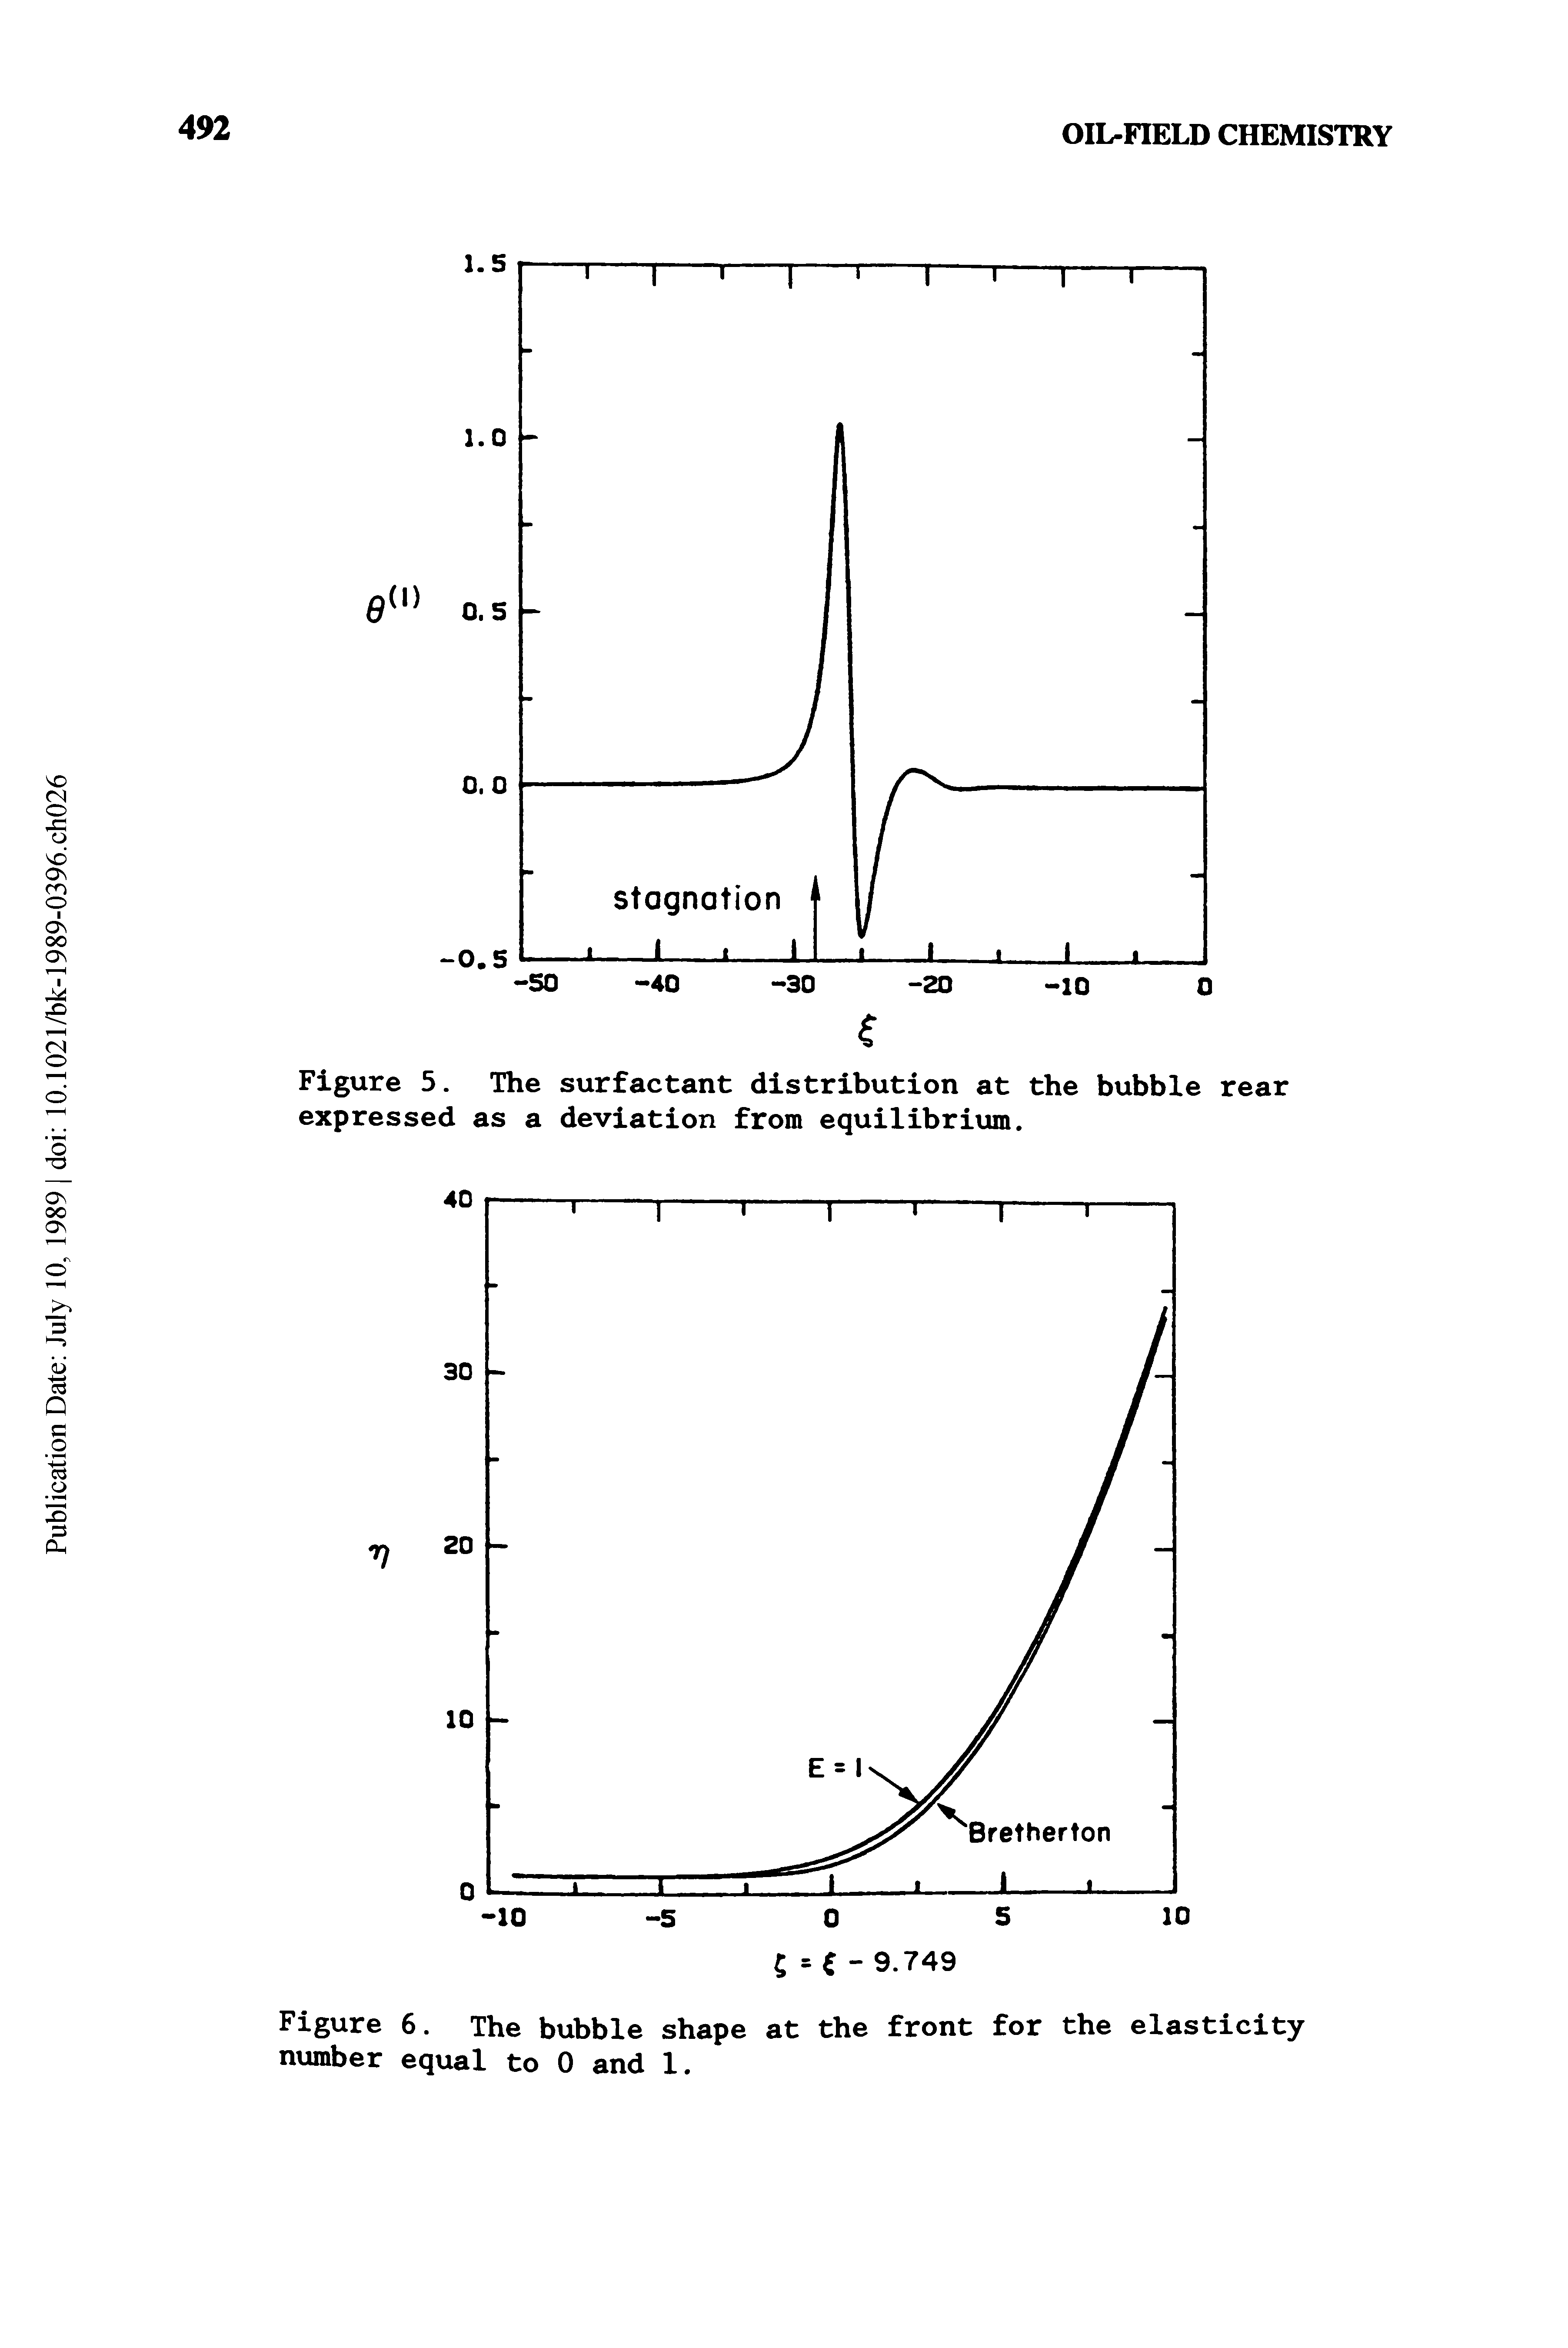 Figure 5. The surfactant distribution at the bubble rear expressed as a deviation from equilibrium.